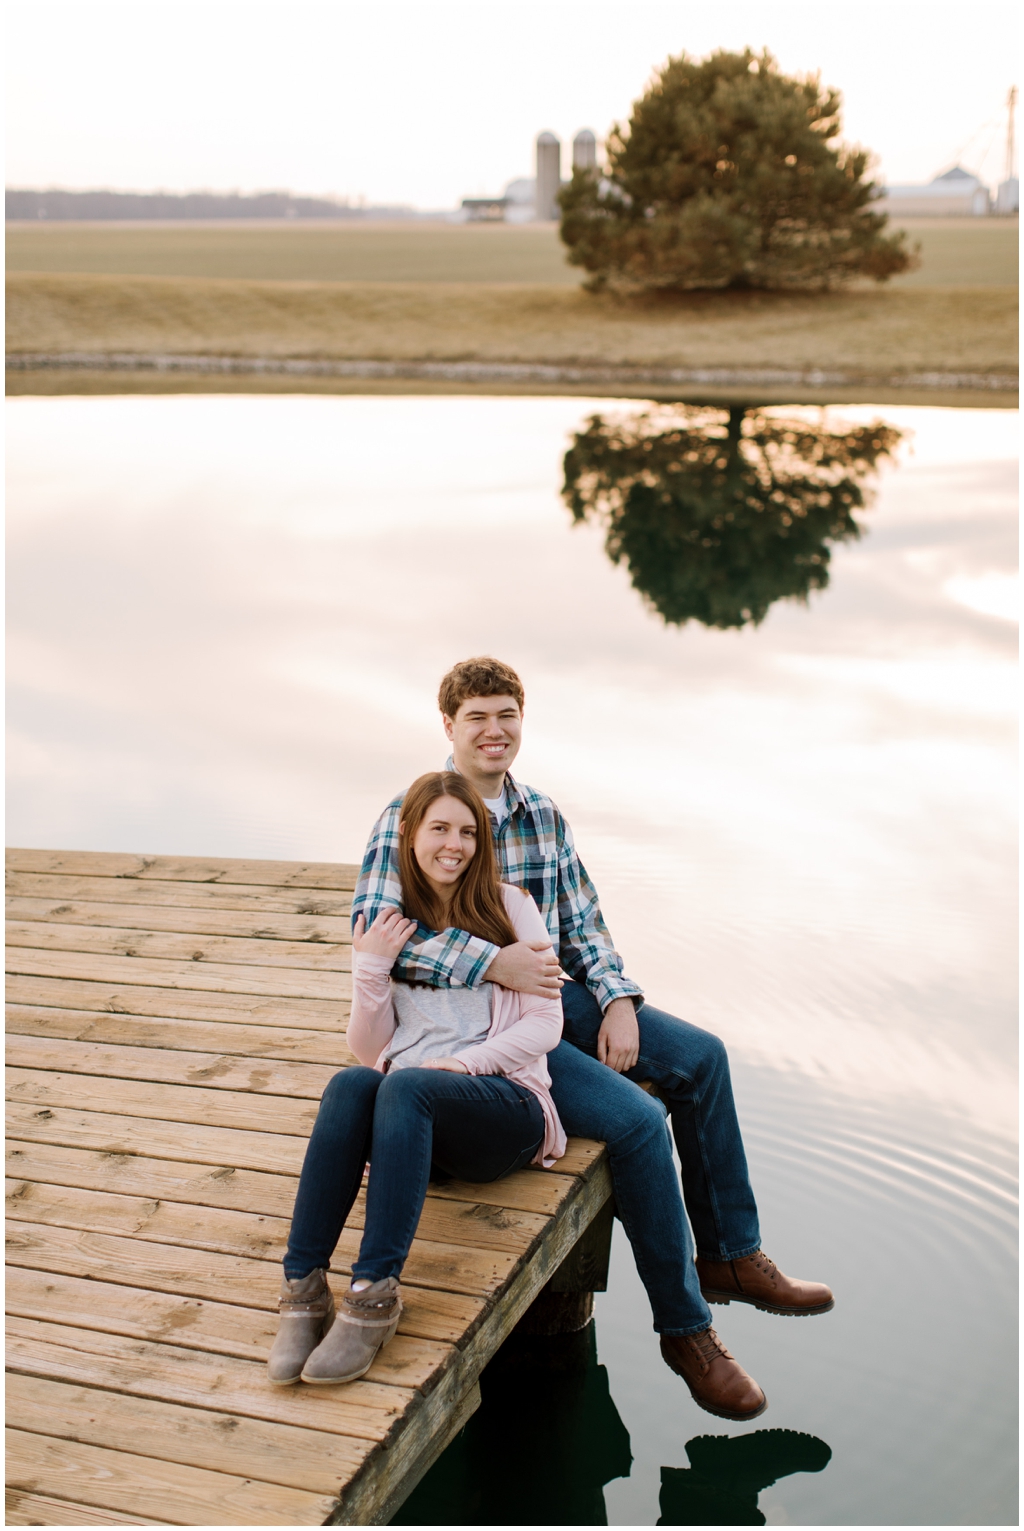 A spring Convoy, Ohio farm engagement session. Image by Holly Michon Photography